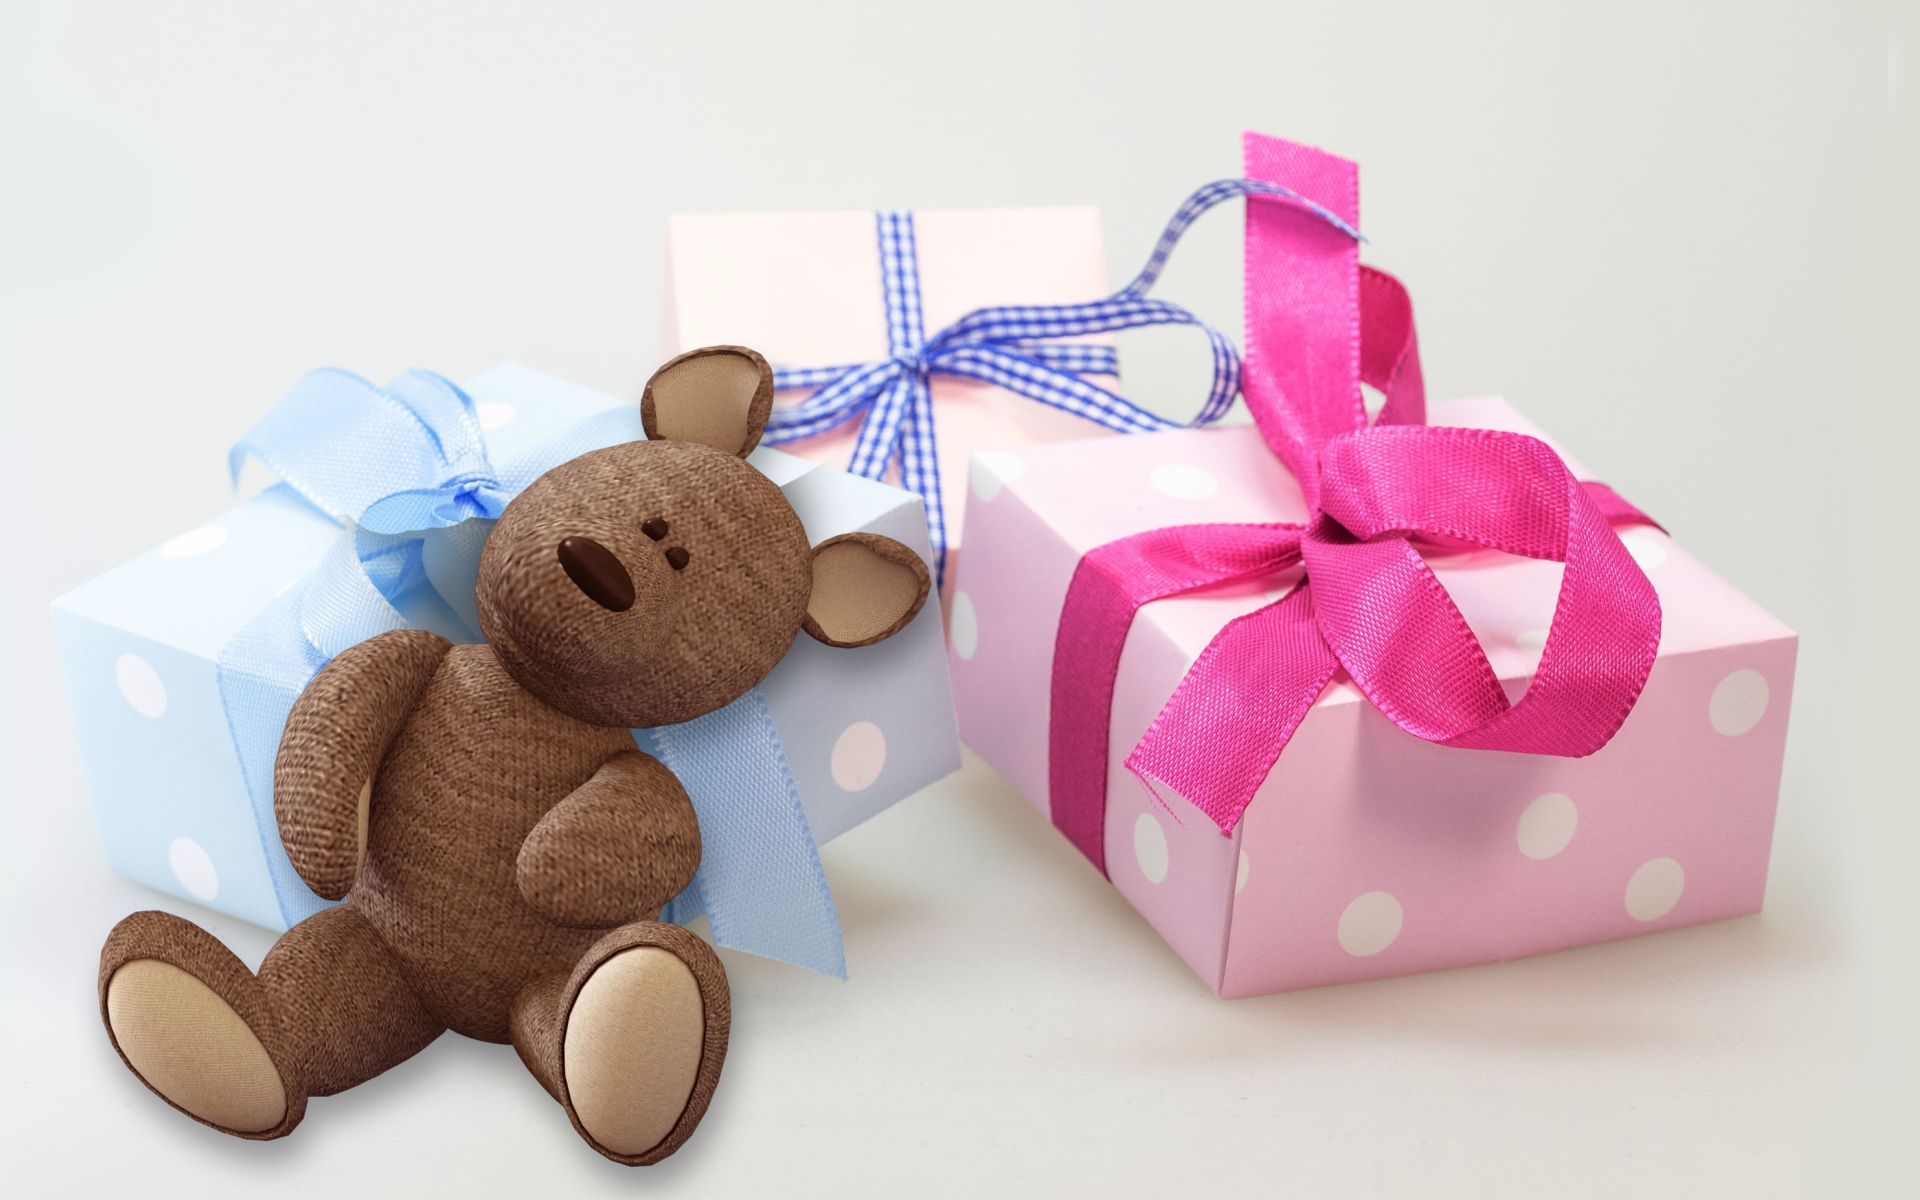 Gifts and teddy bear on a white background